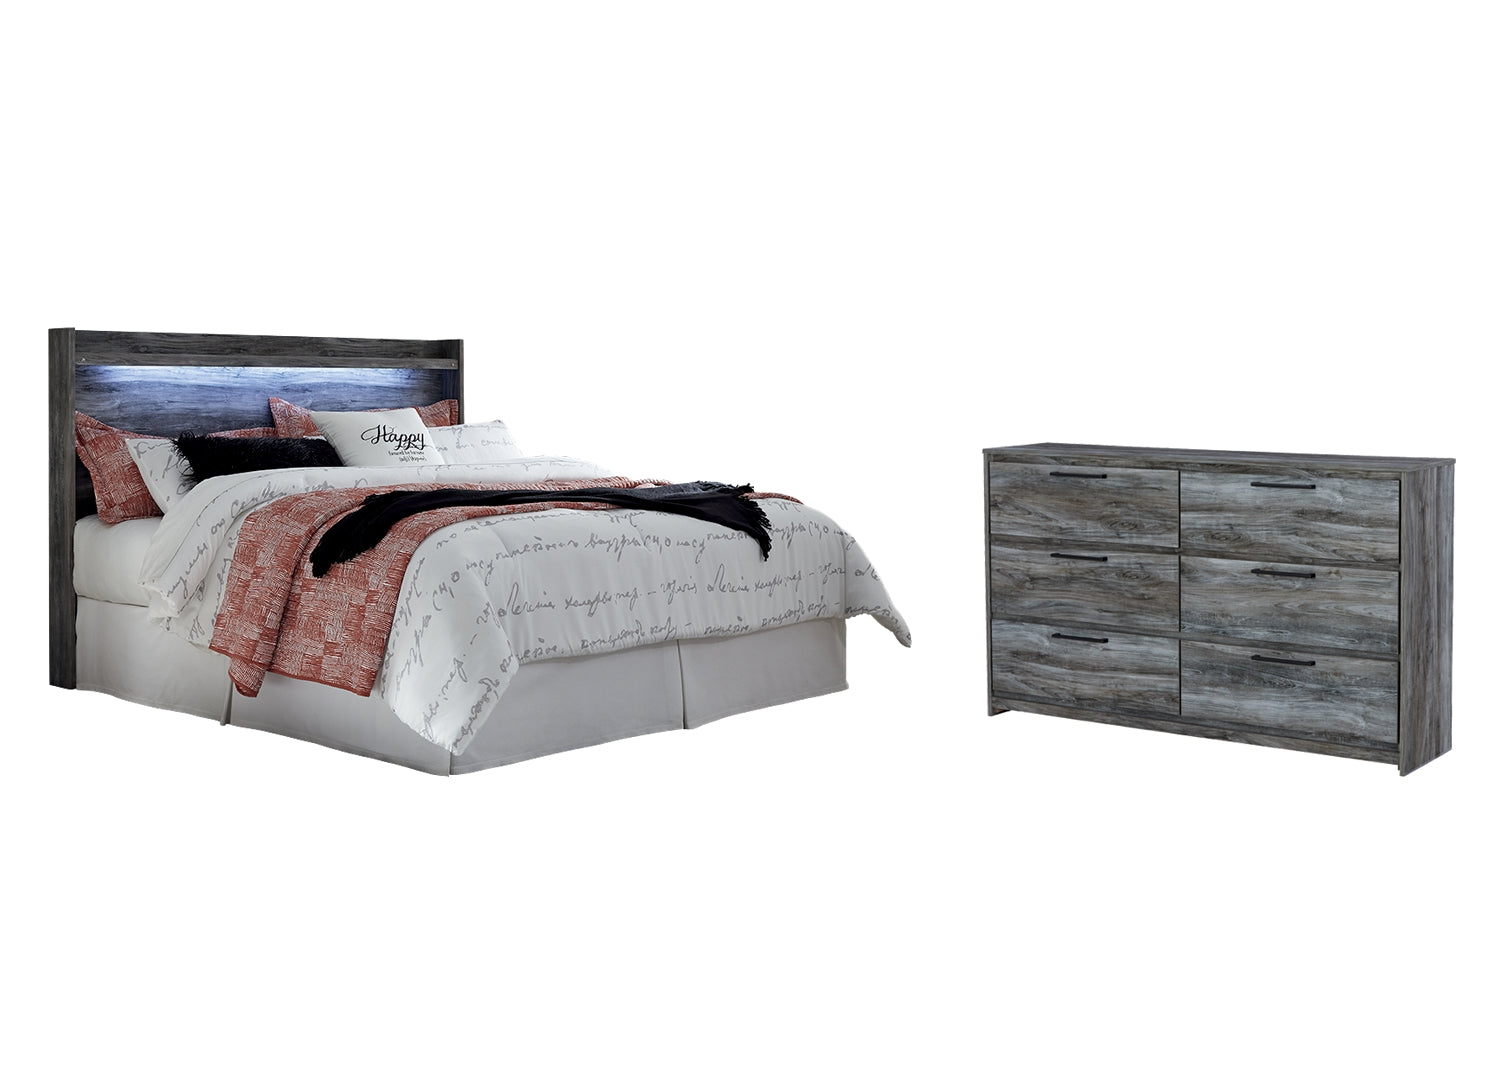 Baystorm King Panel Headboard Bed with Dresser